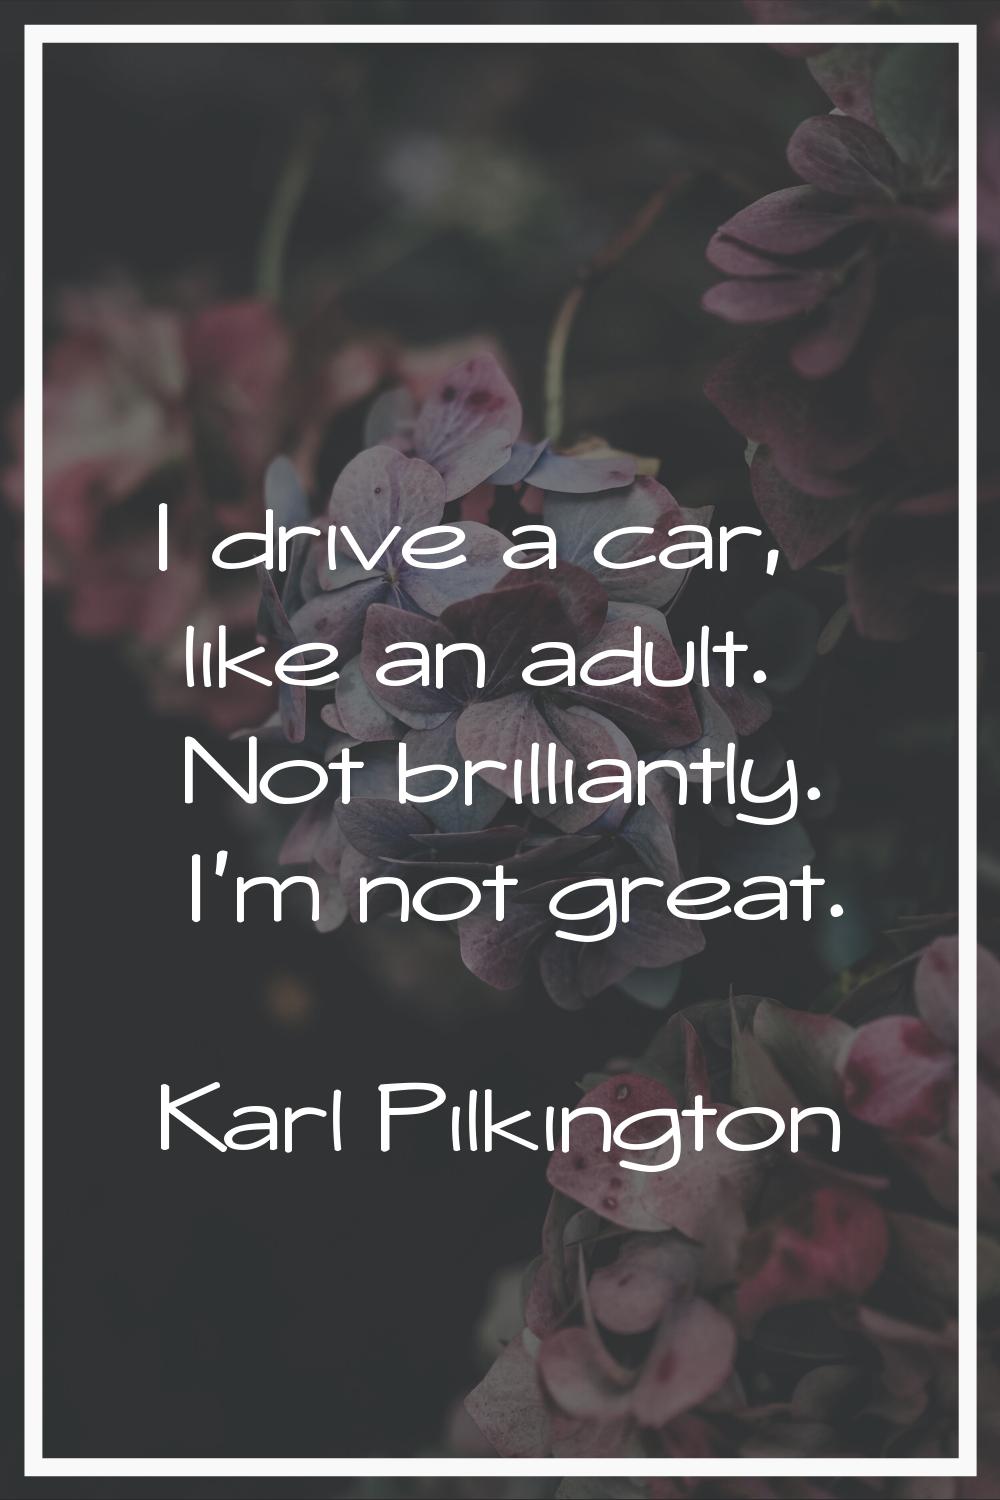 I drive a car, like an adult. Not brilliantly. I'm not great.